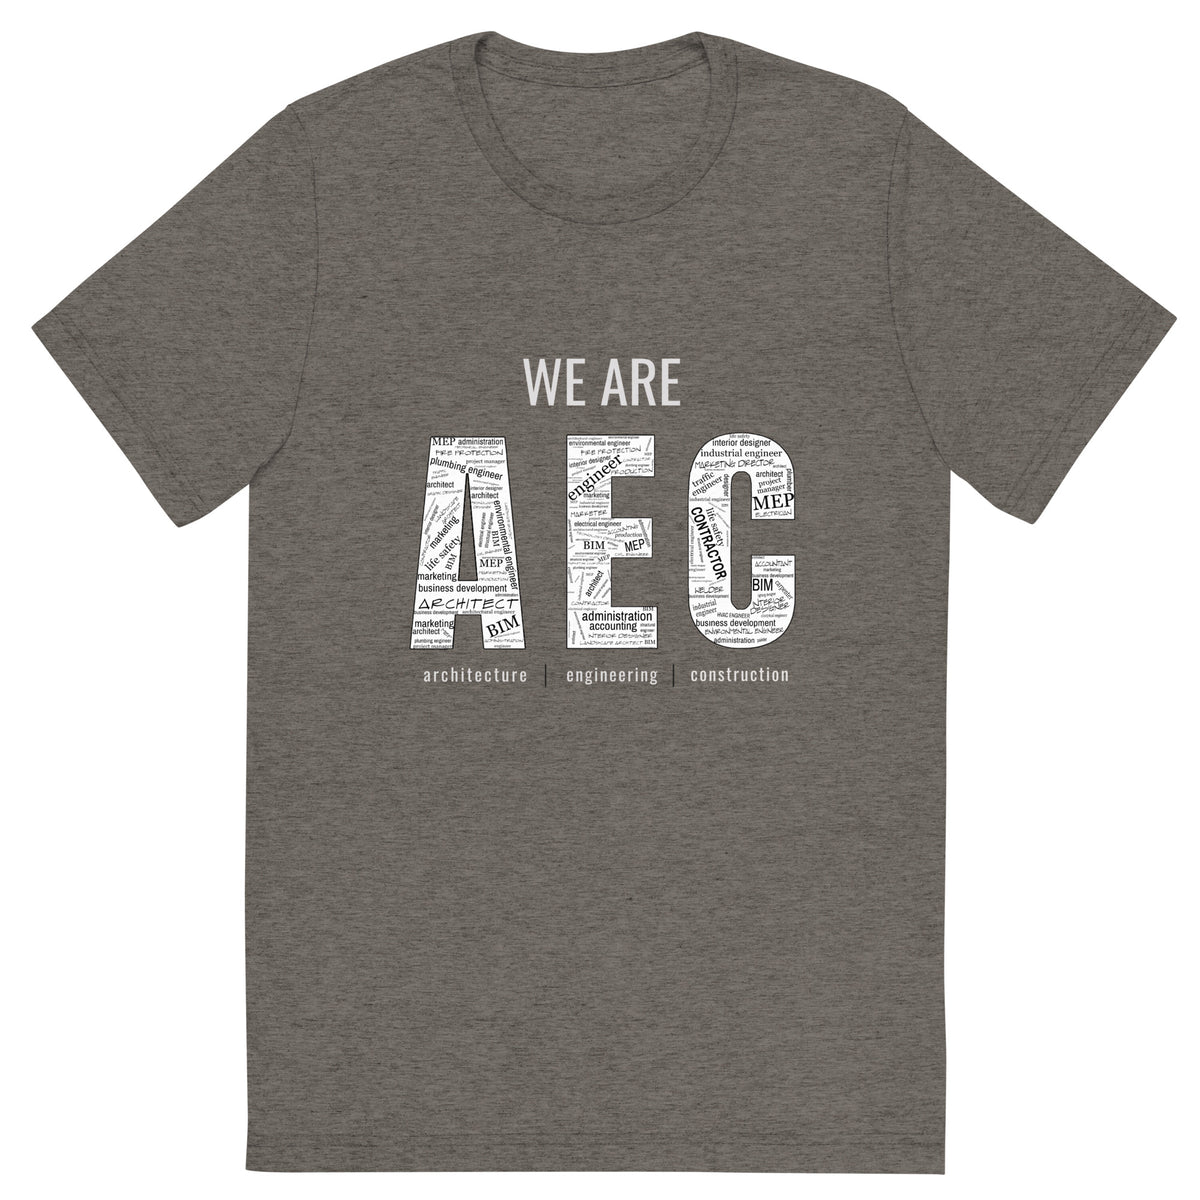 We are AEC | Wastewater Engineer Cover